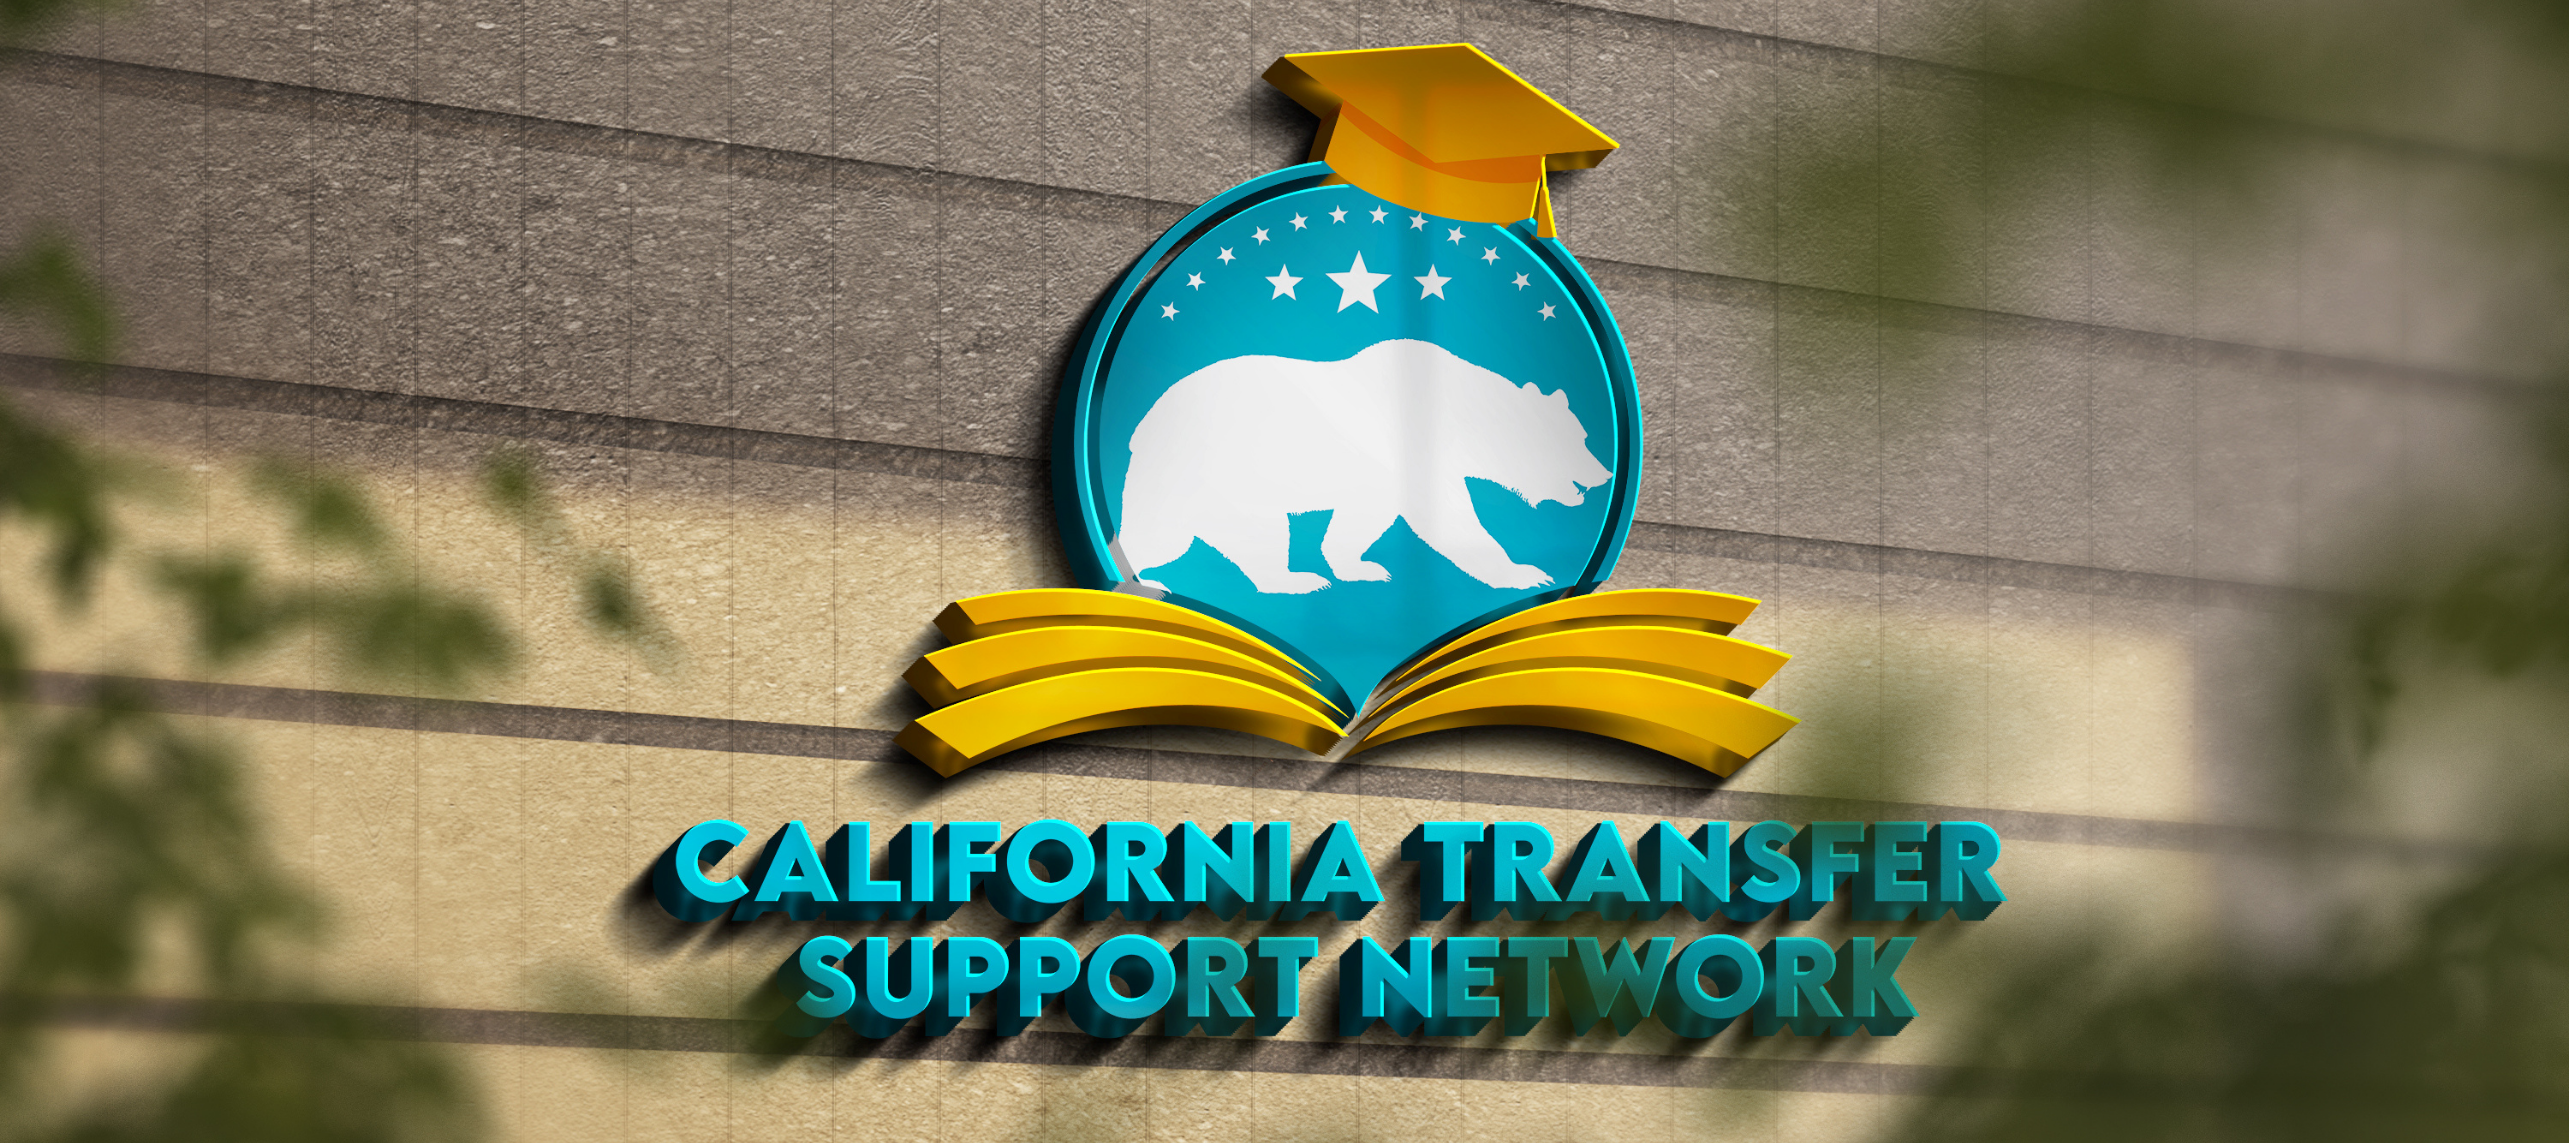 Wall Background 2569 × 1440 px e1655779883927 - California Transfer Support Network